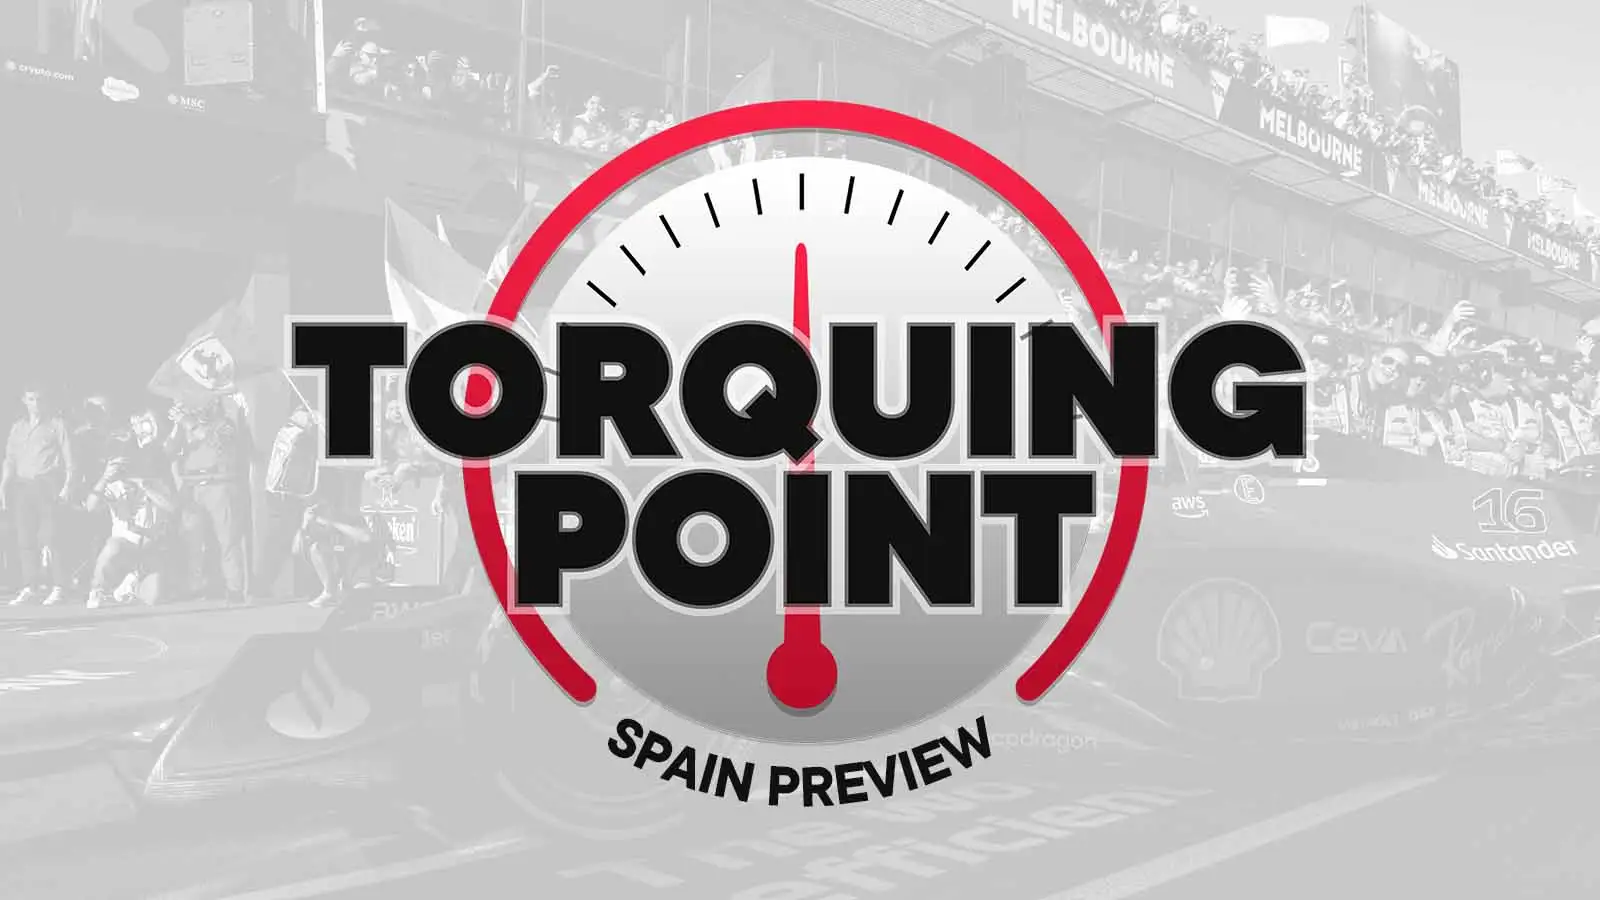 Torquing Point pre-Spain logo. May 2022.